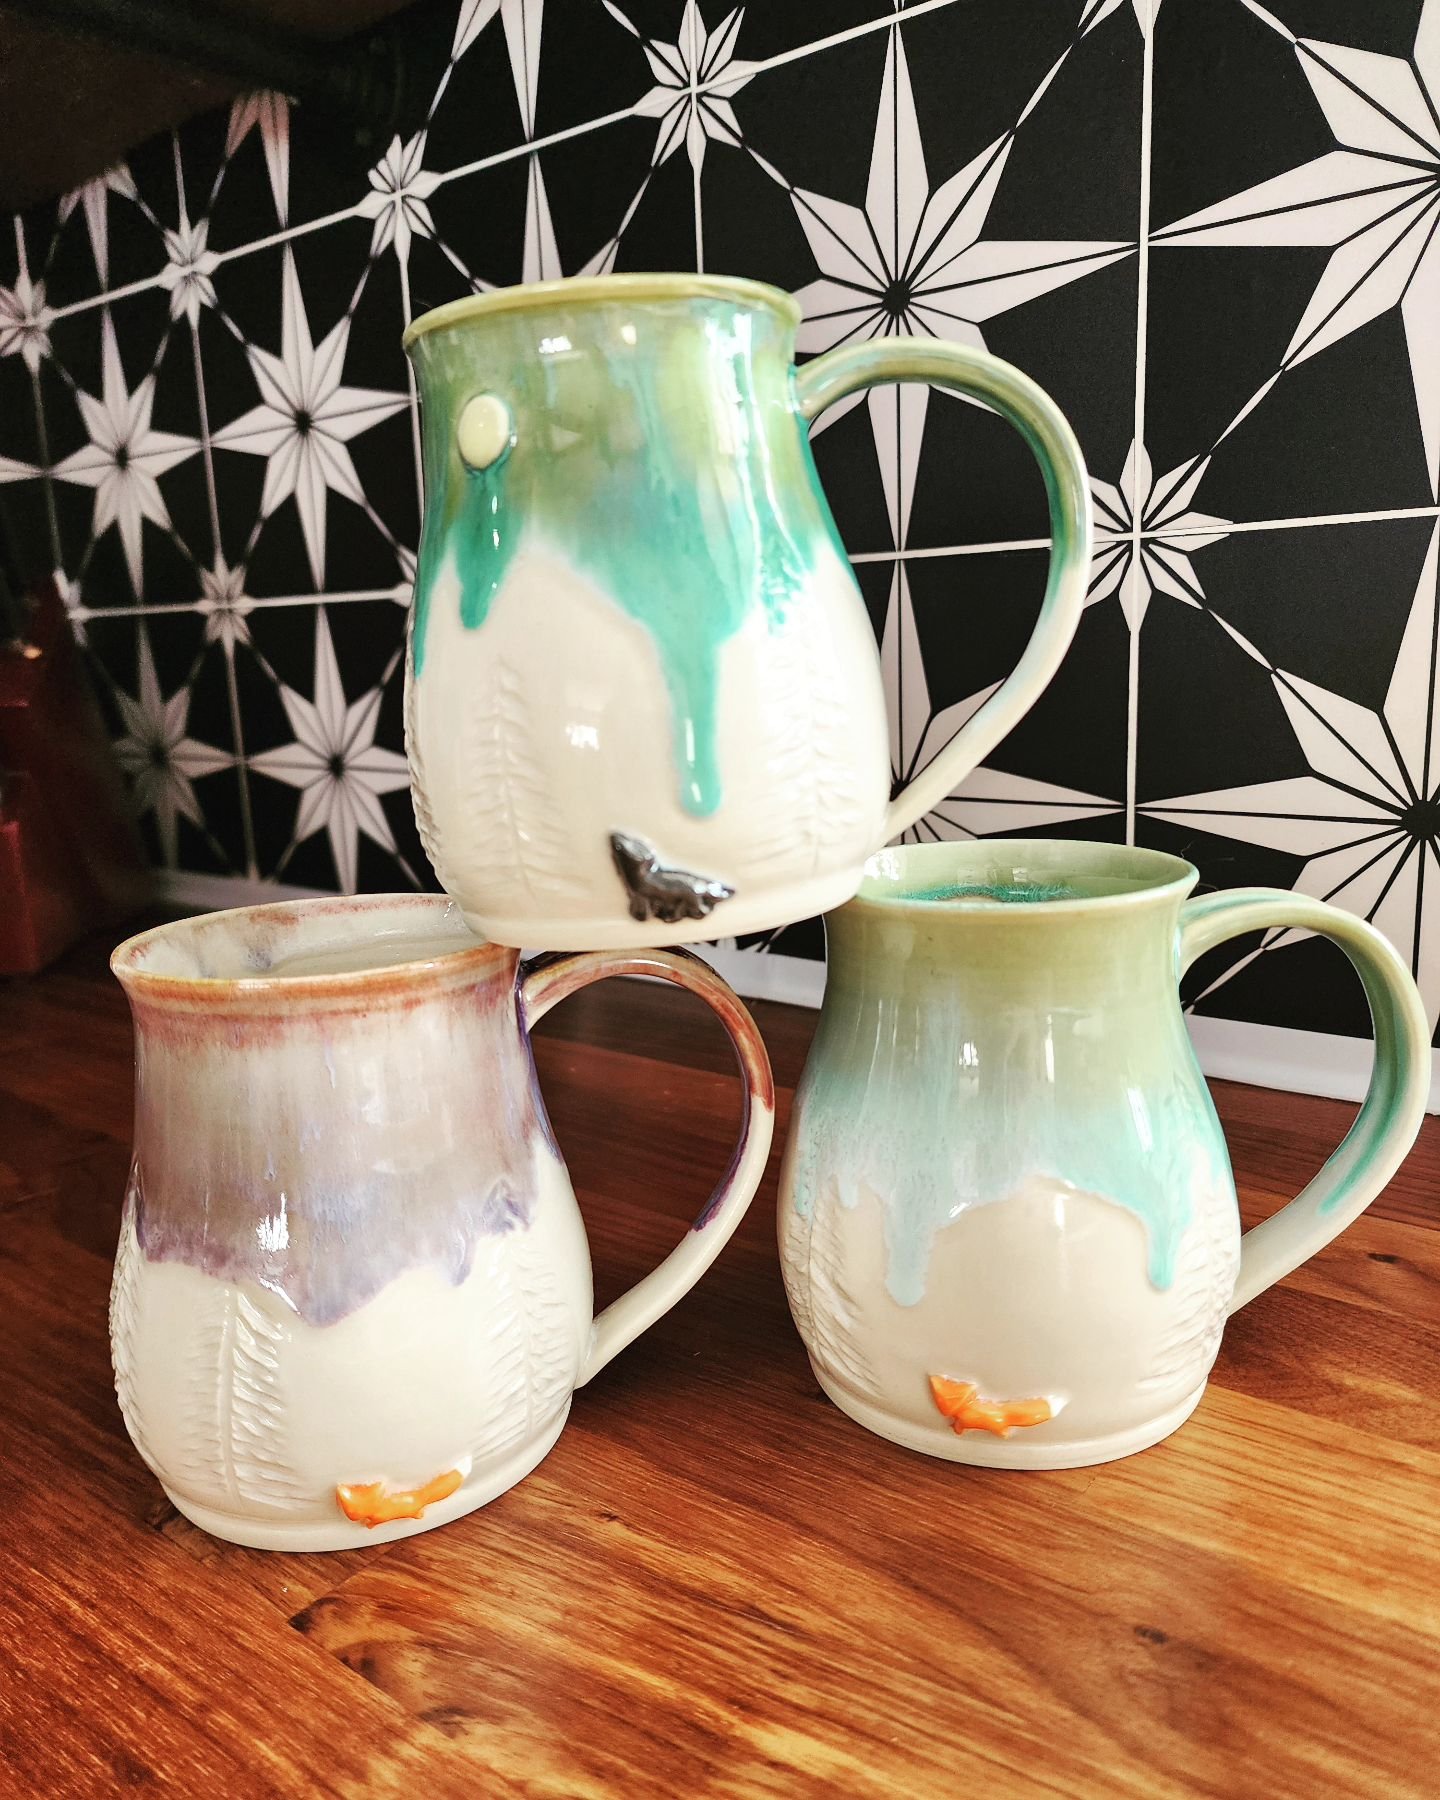 Slowly building up my collection of @laura.drysdale.ceramics  mugs from @greenbriarmarket 

I don't know how to explain the perfection of these mugs. She has absolutely perfected the handle / shape for the best hold. There is serious comfort in just 